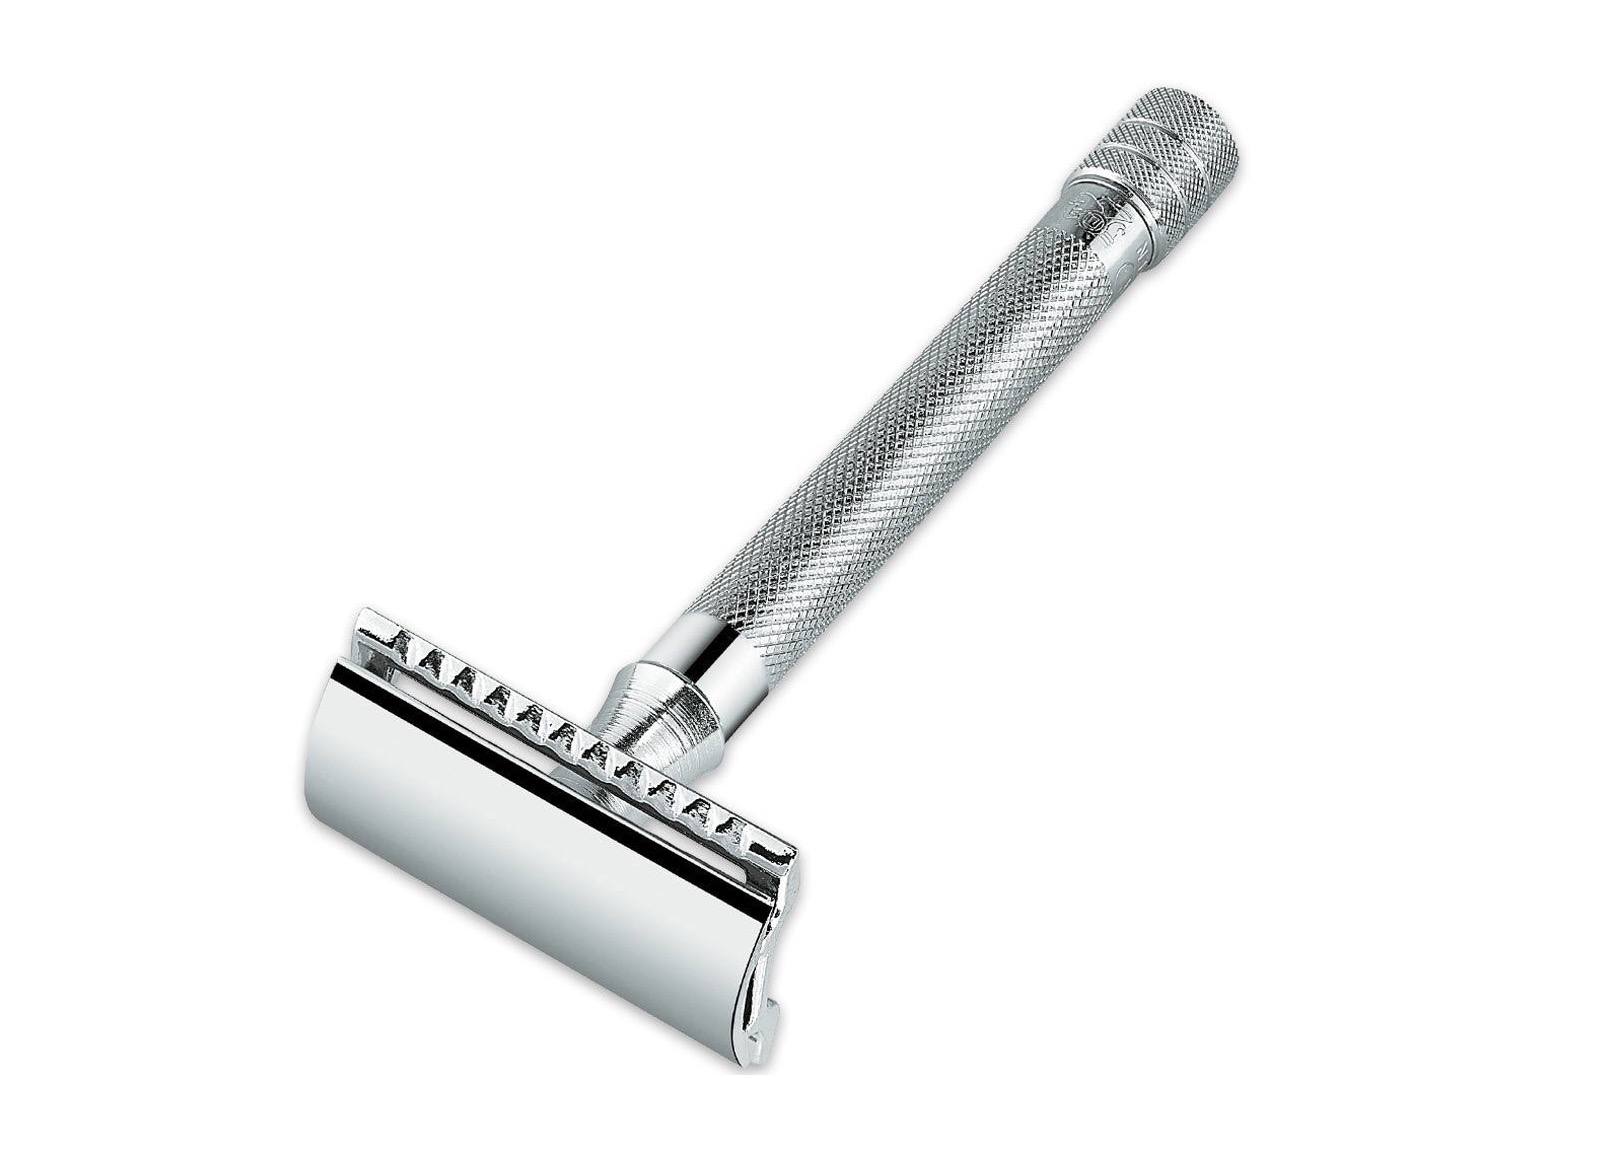 Merkur's long-handled safety razor. ($21 for the razor, and $20 for [100-count Personna Platinum razor blade](http://www.amazon.com/dp/B00ABGN8X4?tag=toolsandtoys-20) refills)